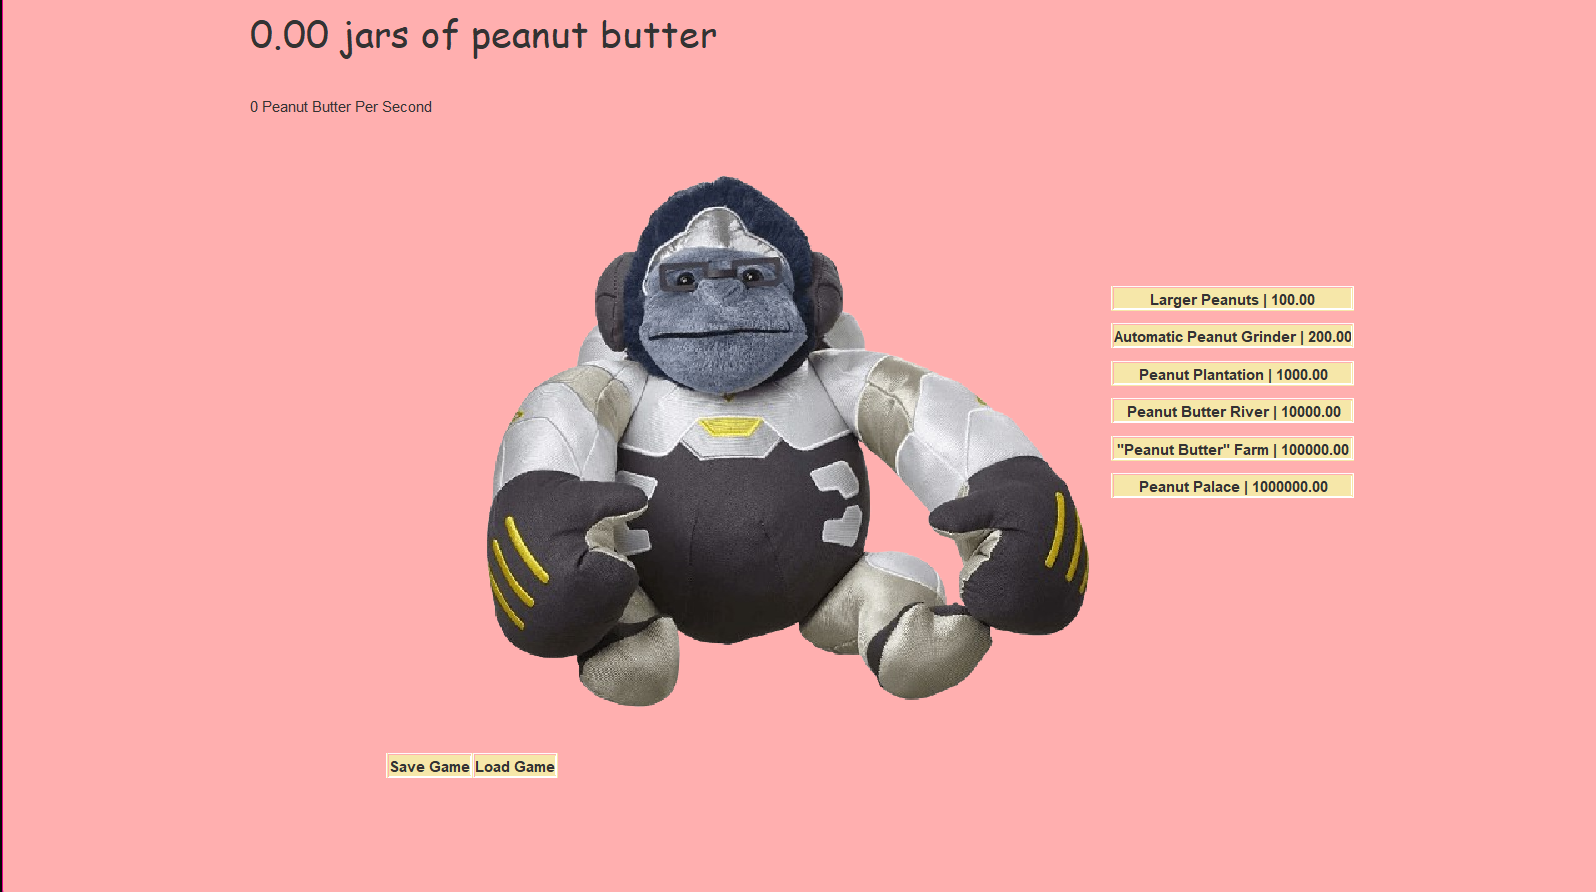 Clicker game of a gorilla collecting peanut butter